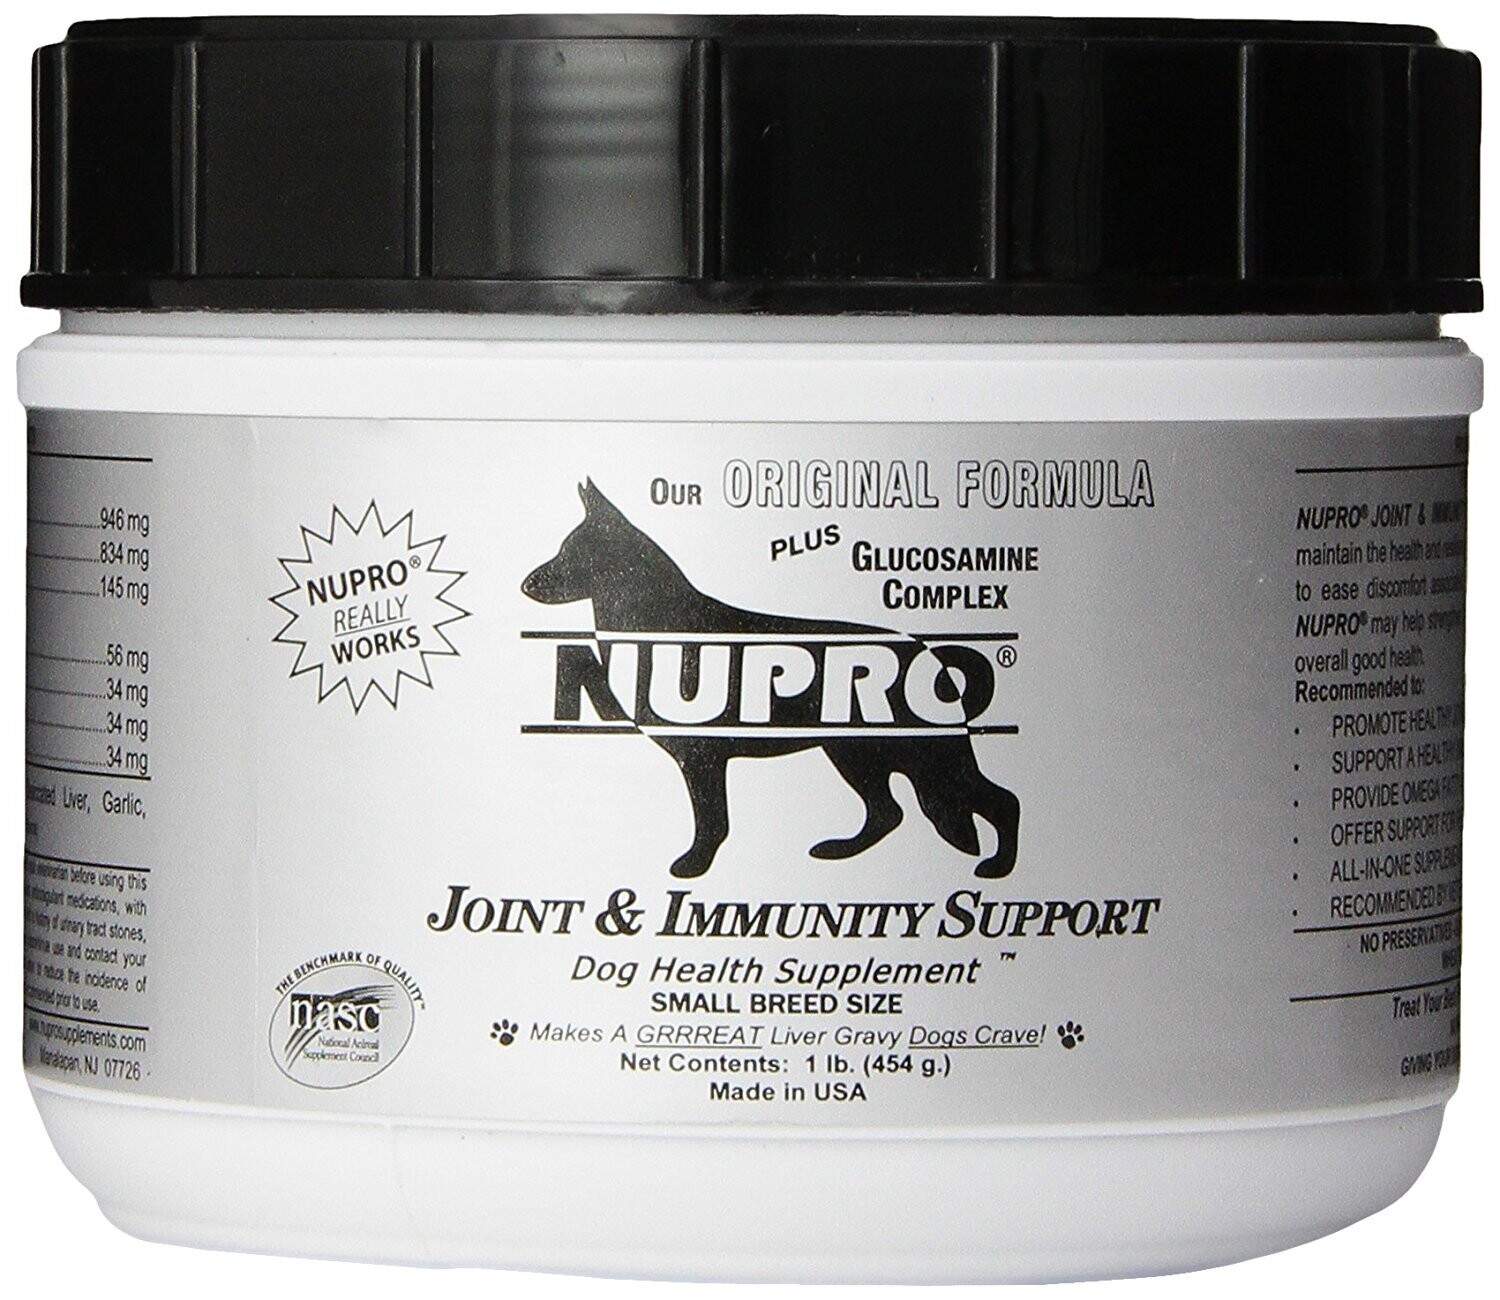 NUPRO DOG JOINT SUPPORT 1LB